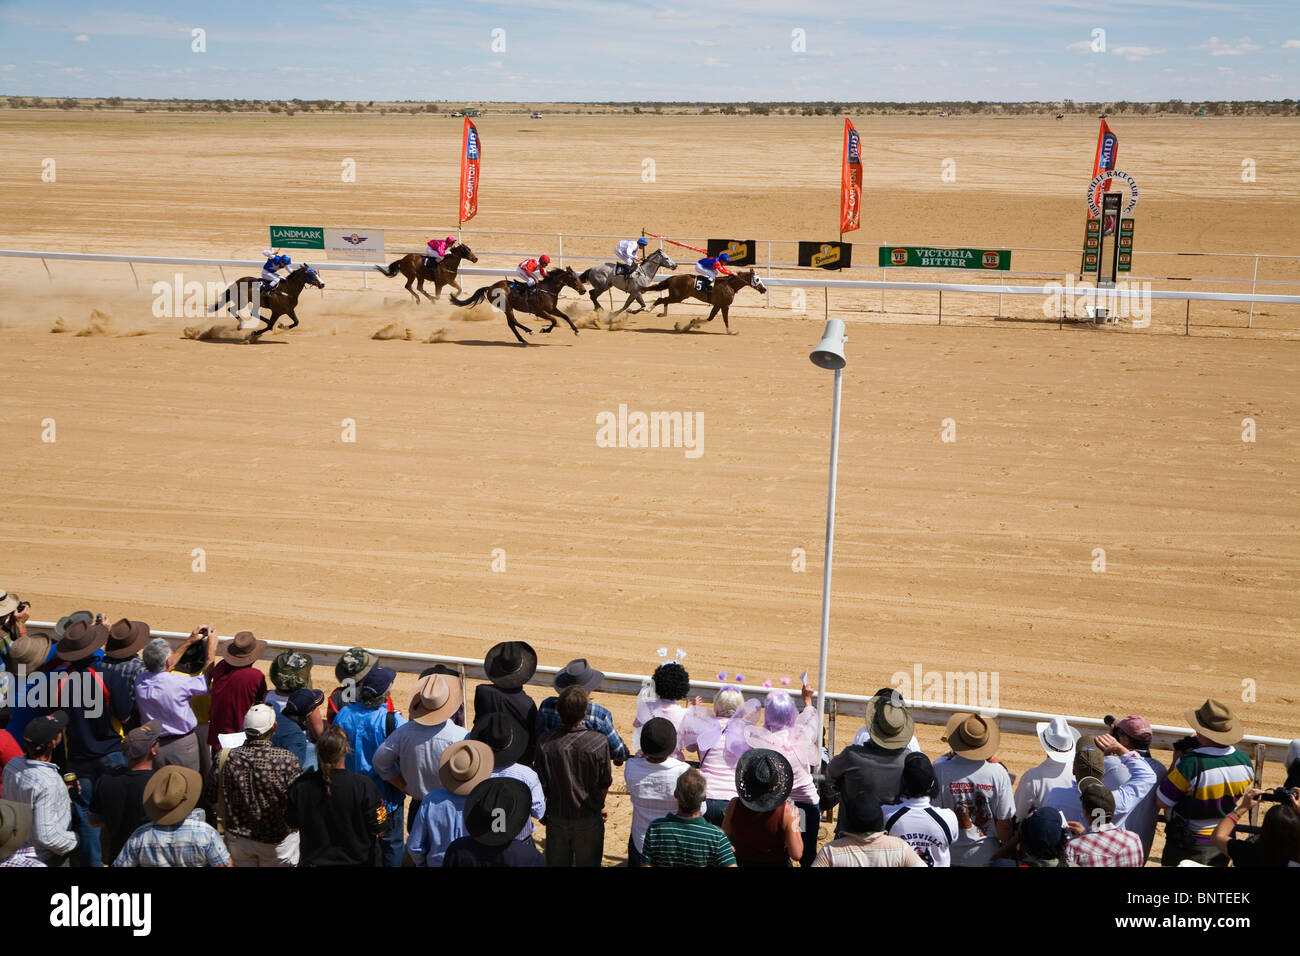 Horse racing in the outback at the Birdsville Cup Races. Birdsville, Queensland, AUSTRALIA. Stock Photo